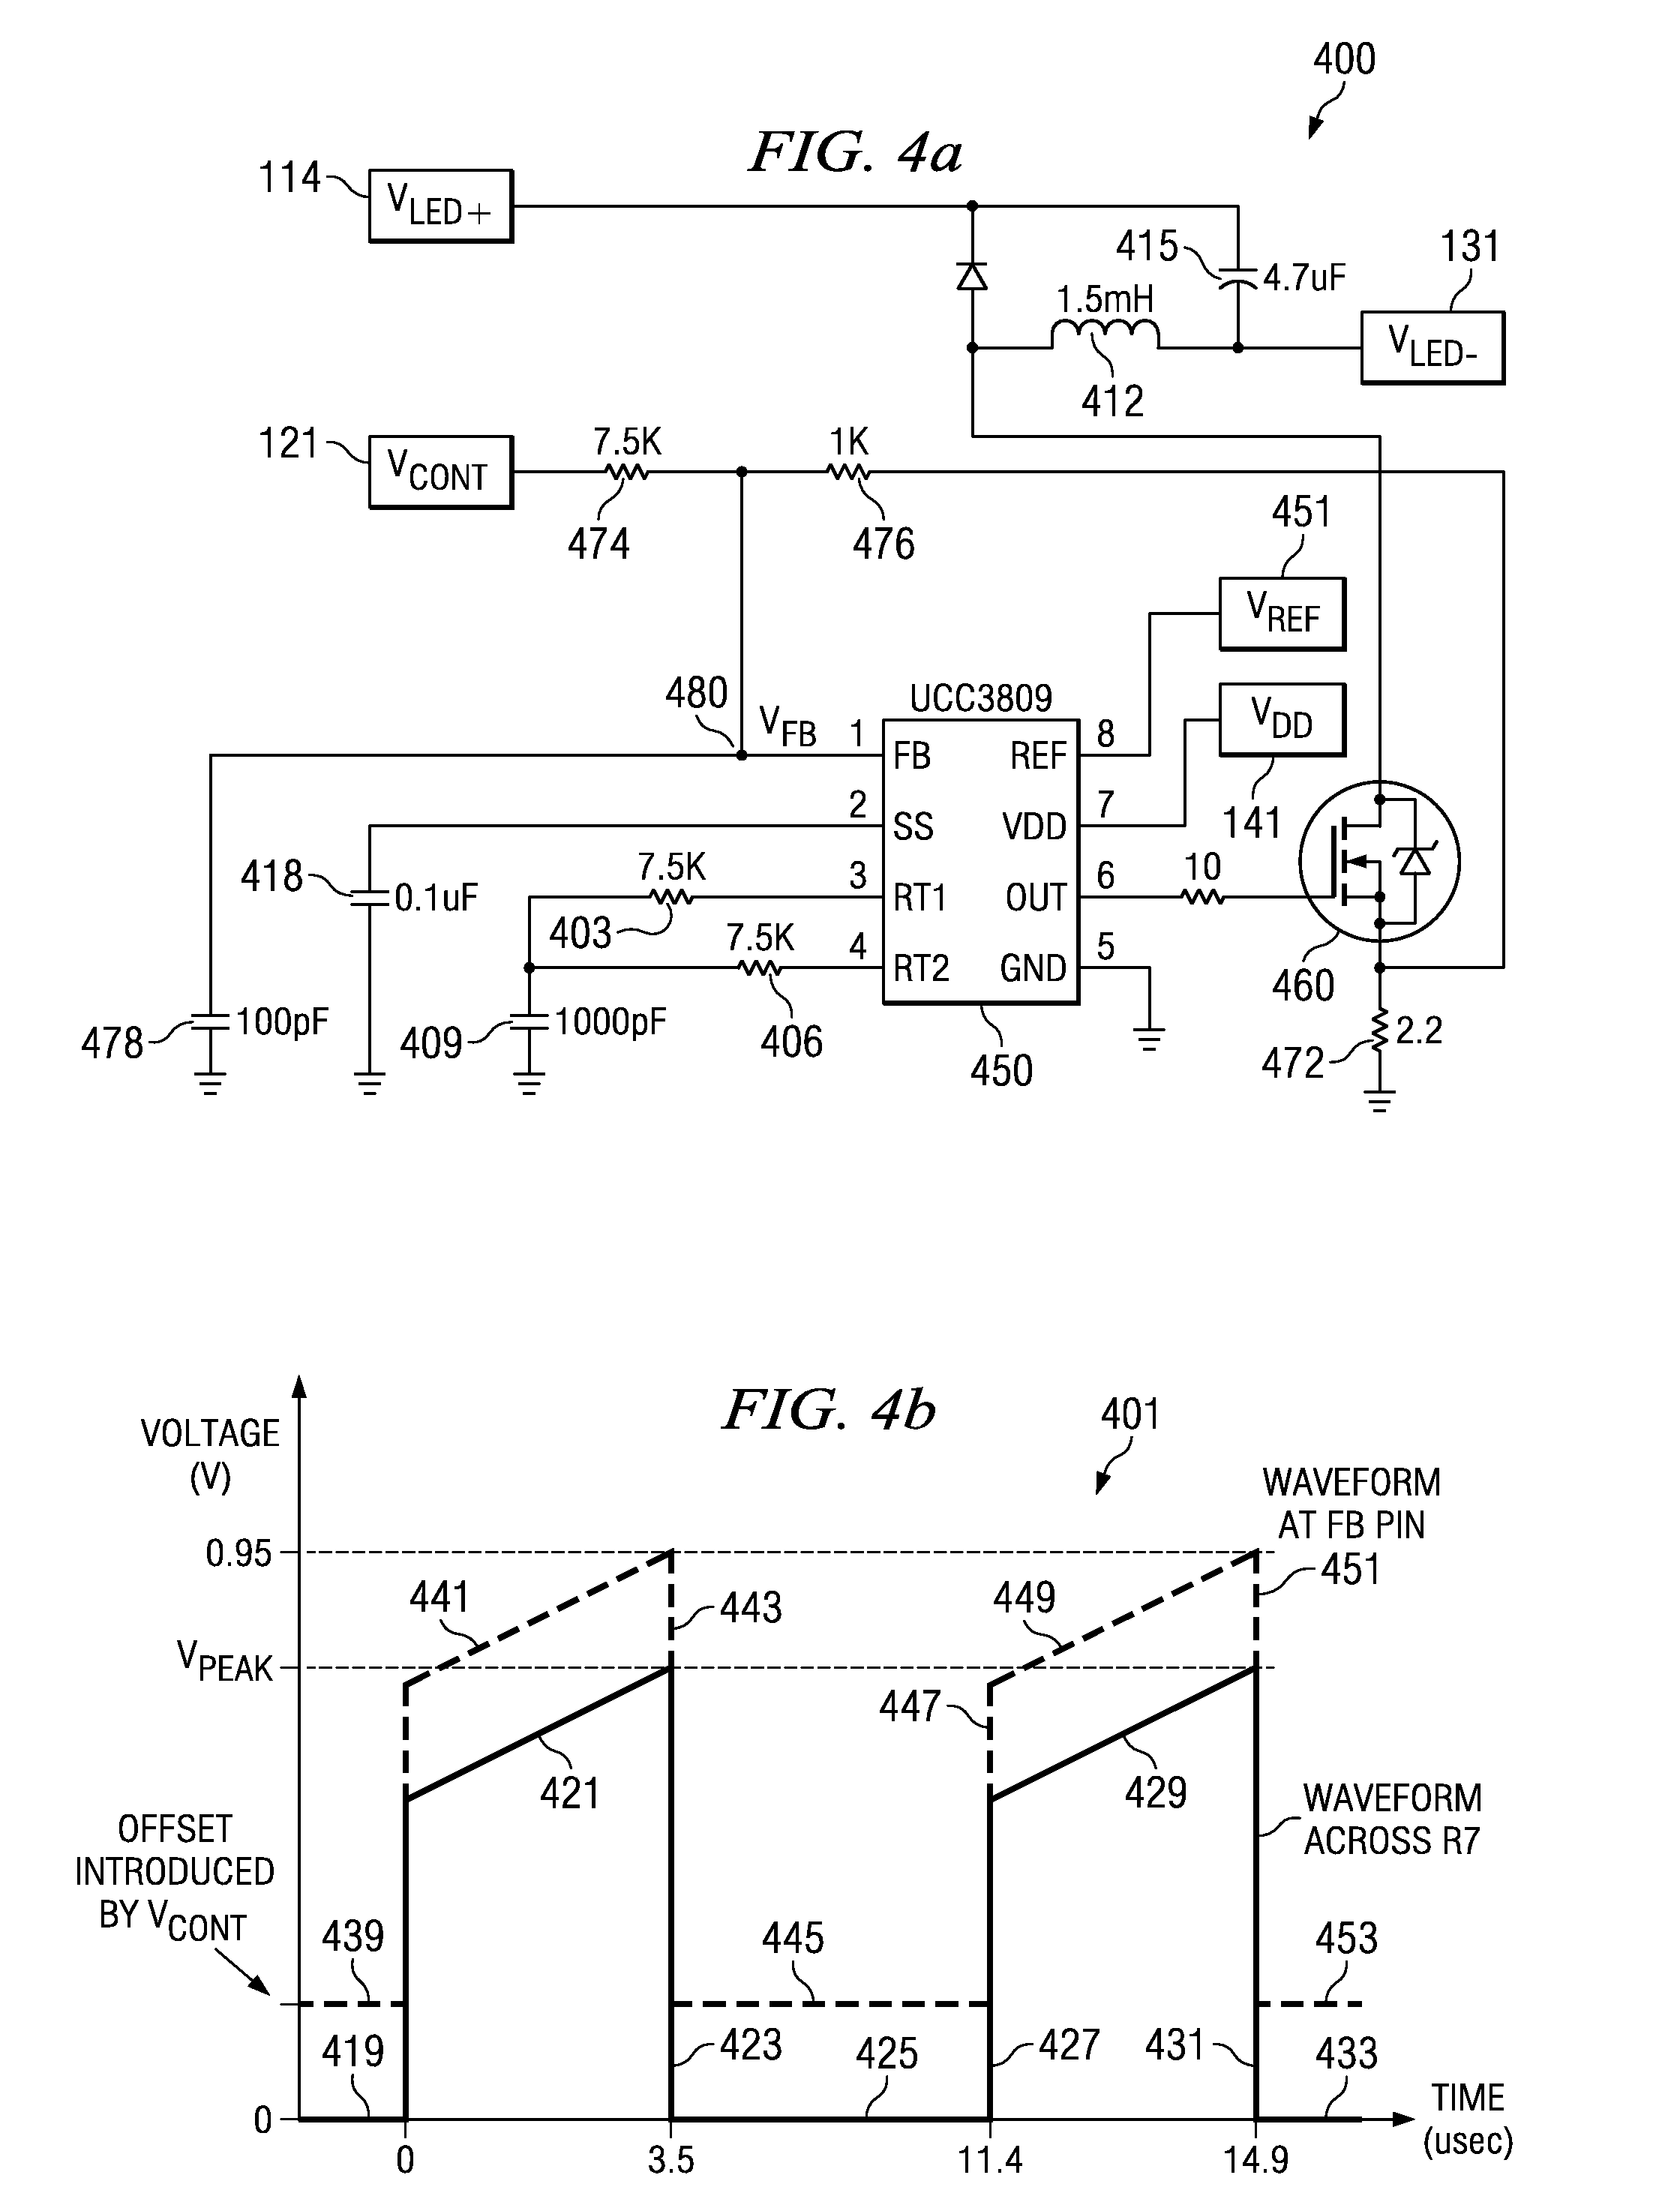 Systems and methods for LED based lighting